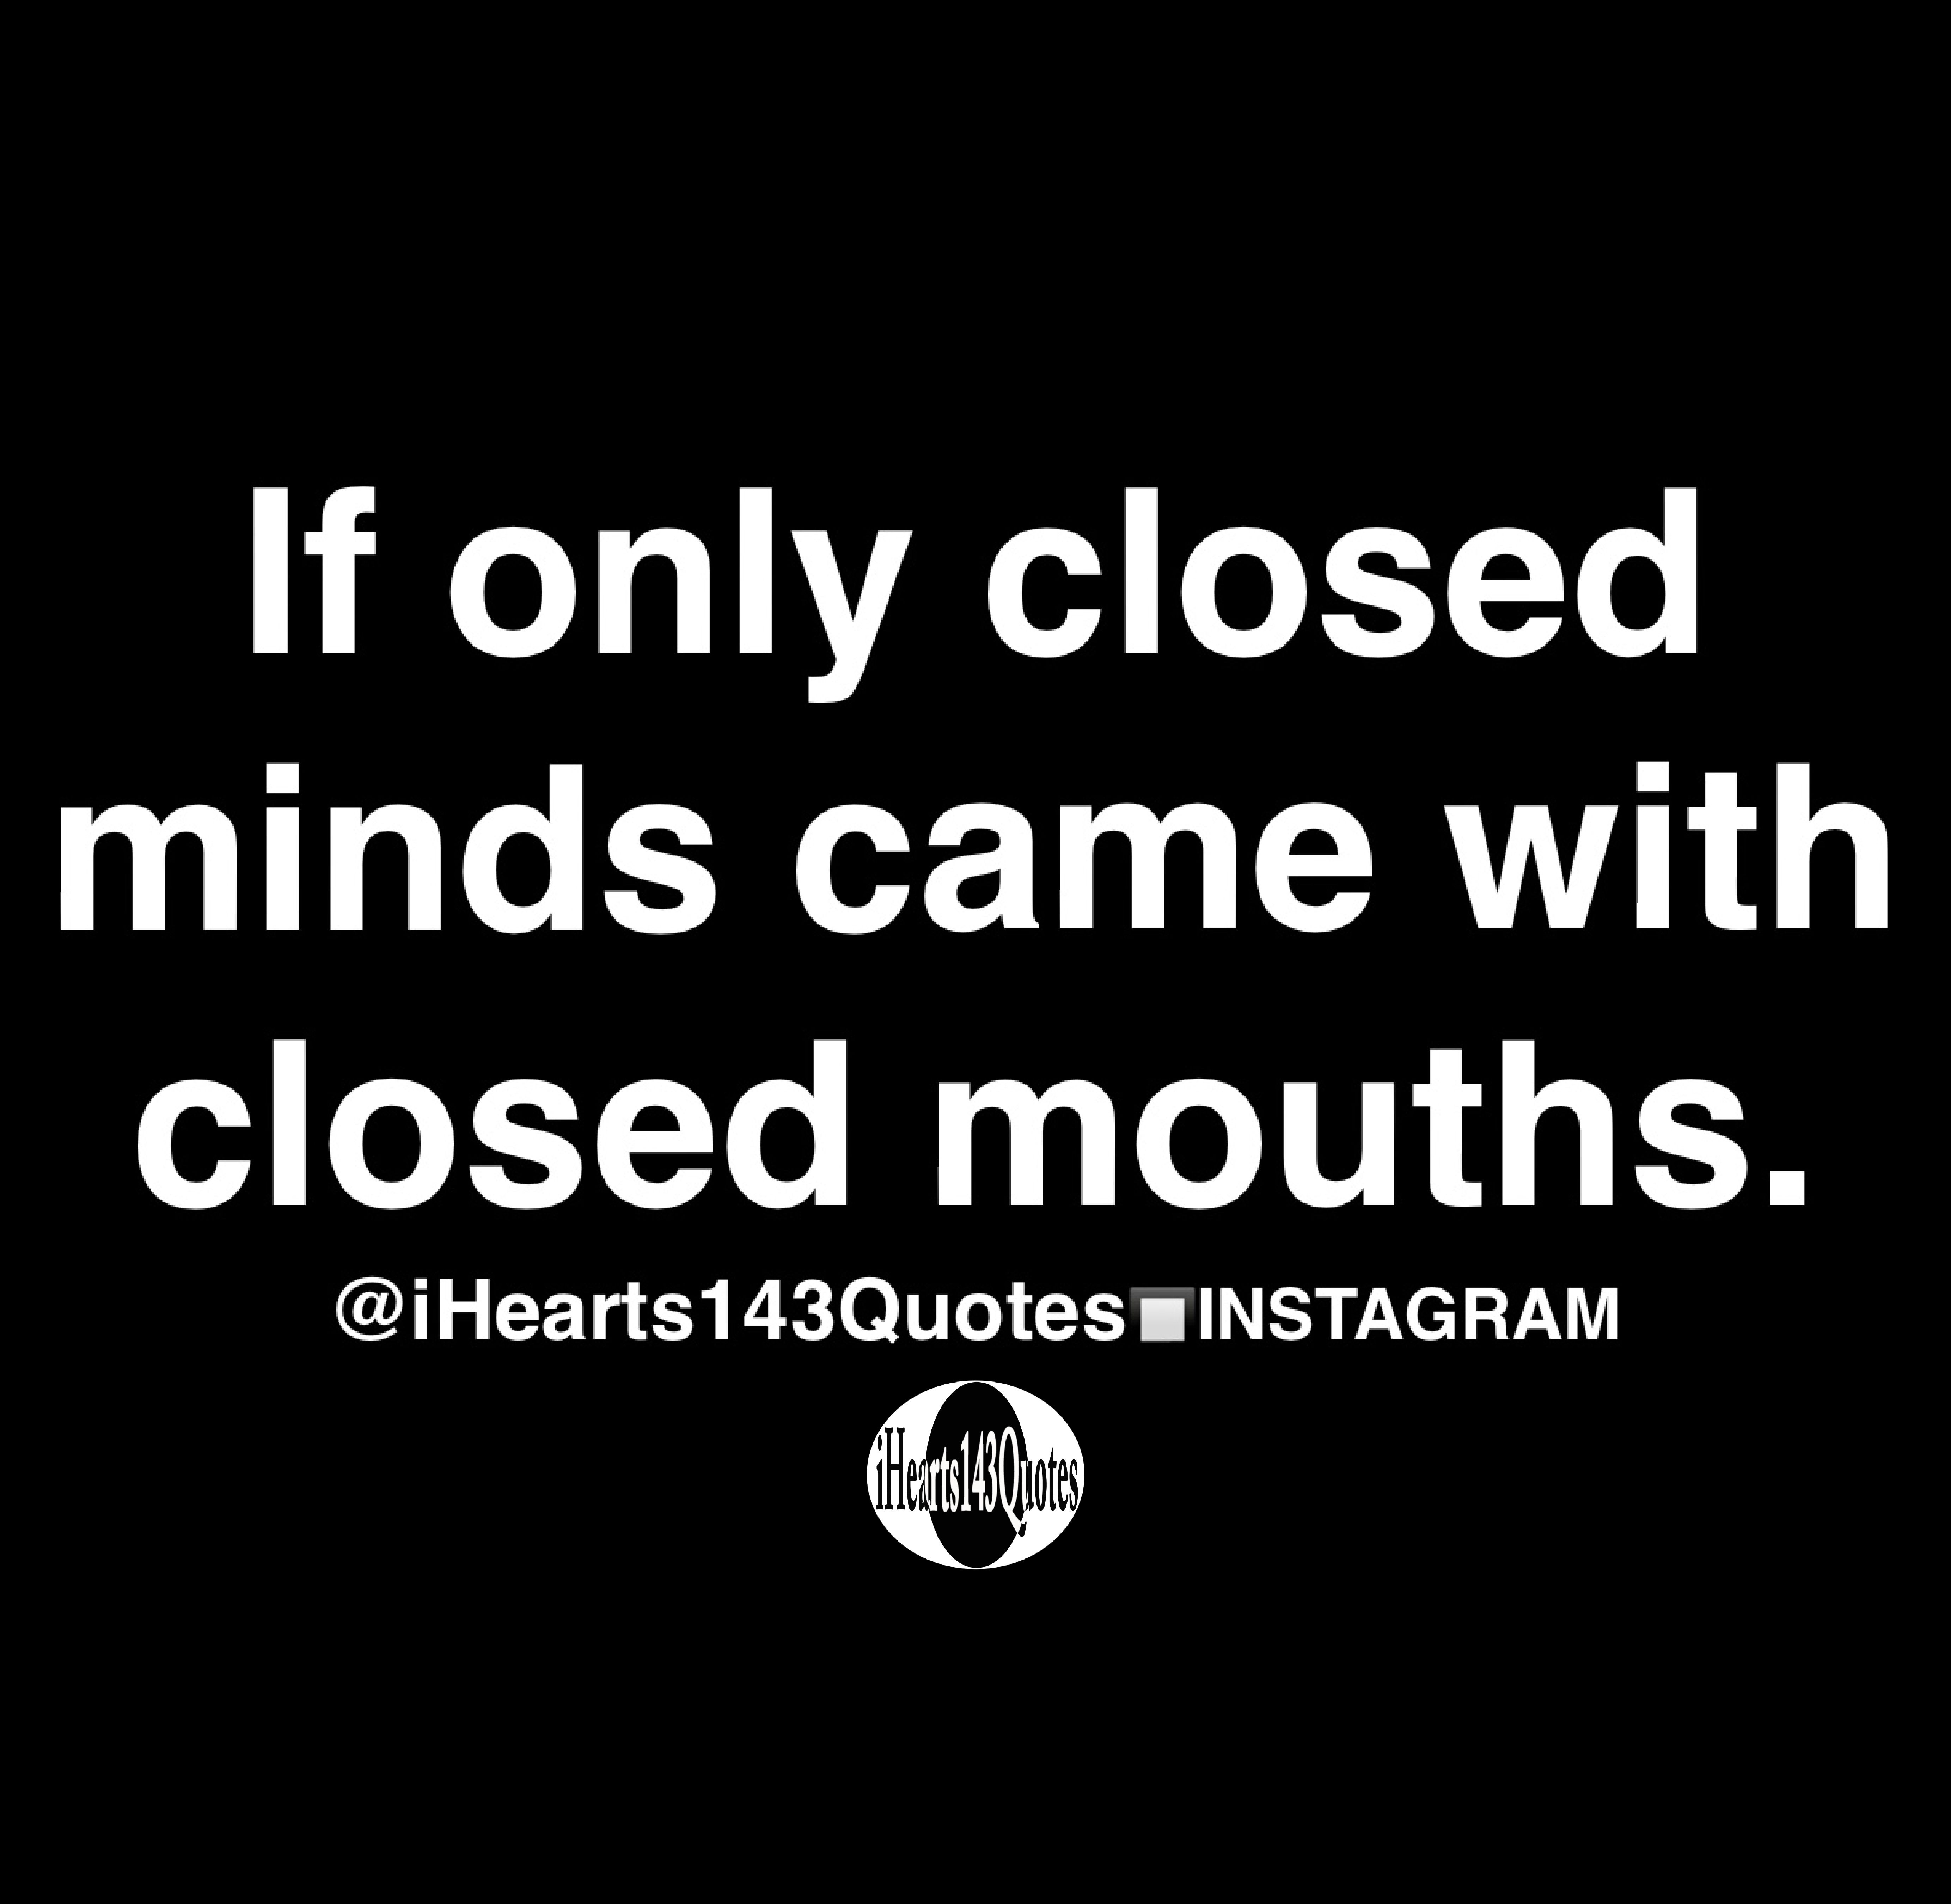 If only closed minds came with closed mouths - Quotes - iHearts143Quotes